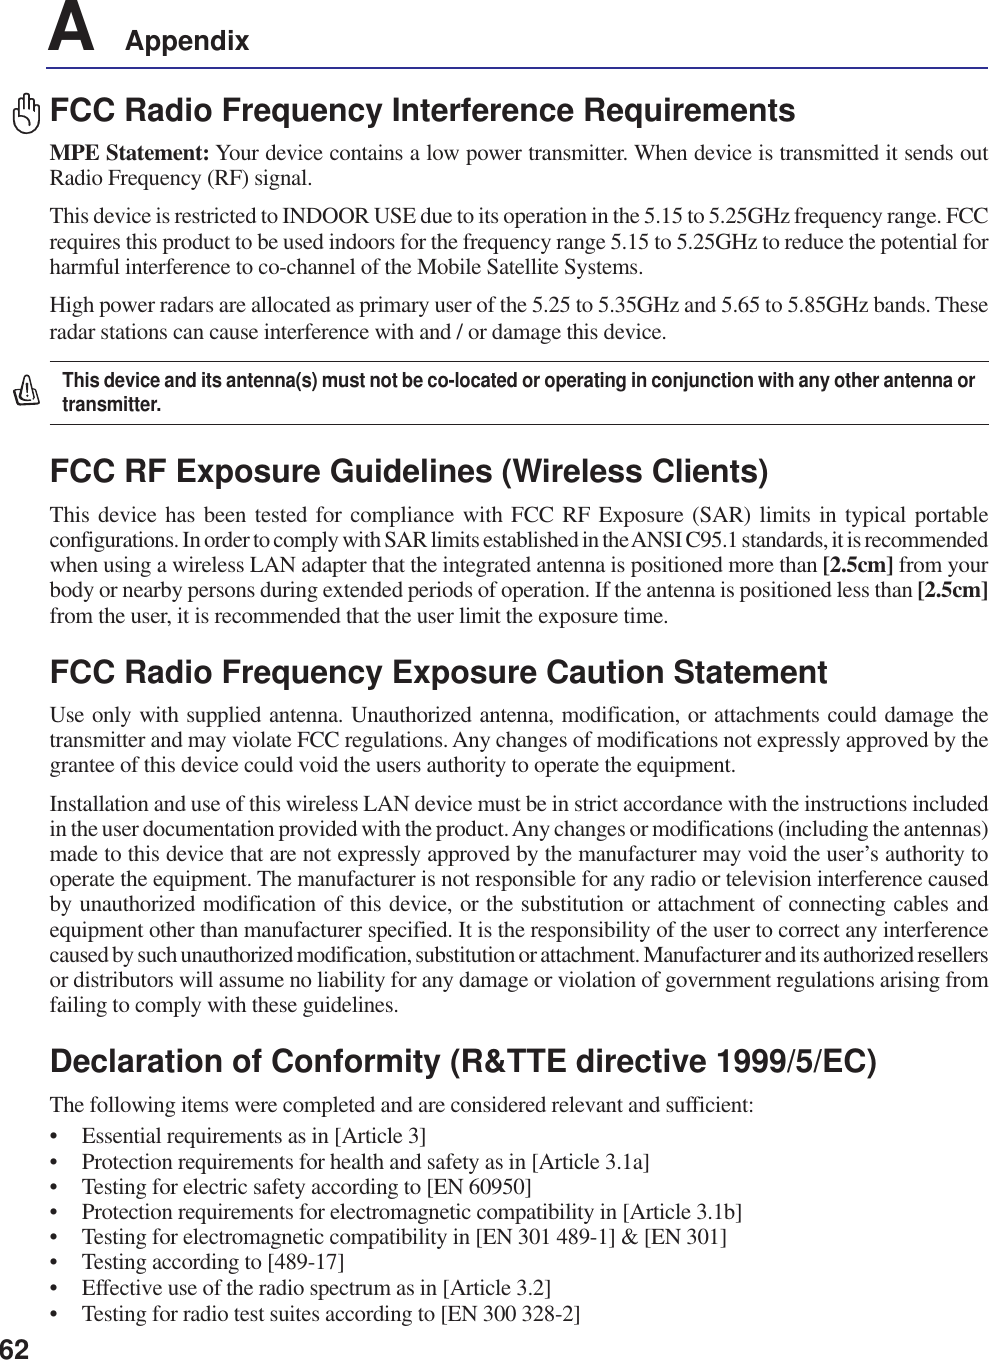 62A    AppendixFCC Radio Frequency Interference RequirementsMPE Statement: Your device contains a low power transmitter. When device is transmitted it sends outRadio Frequency (RF) signal.This device is restricted to INDOOR USE due to its operation in the 5.15 to 5.25GHz frequency range. FCCrequires this product to be used indoors for the frequency range 5.15 to 5.25GHz to reduce the potential forharmful interference to co-channel of the Mobile Satellite Systems.High power radars are allocated as primary user of the 5.25 to 5.35GHz and 5.65 to 5.85GHz bands. Theseradar stations can cause interference with and / or damage this device.This device and its antenna(s) must not be co-located or operating in conjunction with any other antenna ortransmitter.FCC RF Exposure Guidelines (Wireless Clients)This device has been tested for compliance with FCC RF Exposure (SAR) limits in typical portableconfigurations. In order to comply with SAR limits established in the ANSI C95.1 standards, it is recommendedwhen using a wireless LAN adapter that the integrated antenna is positioned more than [2.5cm] from yourbody or nearby persons during extended periods of operation. If the antenna is positioned less than [2.5cm]from the user, it is recommended that the user limit the exposure time.FCC Radio Frequency Exposure Caution StatementUse only with supplied antenna. Unauthorized antenna, modification, or attachments could damage thetransmitter and may violate FCC regulations. Any changes of modifications not expressly approved by thegrantee of this device could void the users authority to operate the equipment.Installation and use of this wireless LAN device must be in strict accordance with the instructions includedin the user documentation provided with the product. Any changes or modifications (including the antennas)made to this device that are not expressly approved by the manufacturer may void the user’s authority tooperate the equipment. The manufacturer is not responsible for any radio or television interference causedby unauthorized modification of this device, or the substitution or attachment of connecting cables andequipment other than manufacturer specified. It is the responsibility of the user to correct any interferencecaused by such unauthorized modification, substitution or attachment. Manufacturer and its authorized resellersor distributors will assume no liability for any damage or violation of government regulations arising fromfailing to comply with these guidelines.Declaration of Conformity (R&amp;TTE directive 1999/5/EC)The following items were completed and are considered relevant and sufficient:• Essential requirements as in [Article 3]• Protection requirements for health and safety as in [Article 3.1a]• Testing for electric safety according to [EN 60950]• Protection requirements for electromagnetic compatibility in [Article 3.1b]• Testing for electromagnetic compatibility in [EN 301 489-1] &amp; [EN 301]• Testing according to [489-17]• Effective use of the radio spectrum as in [Article 3.2]• Testing for radio test suites according to [EN 300 328-2]